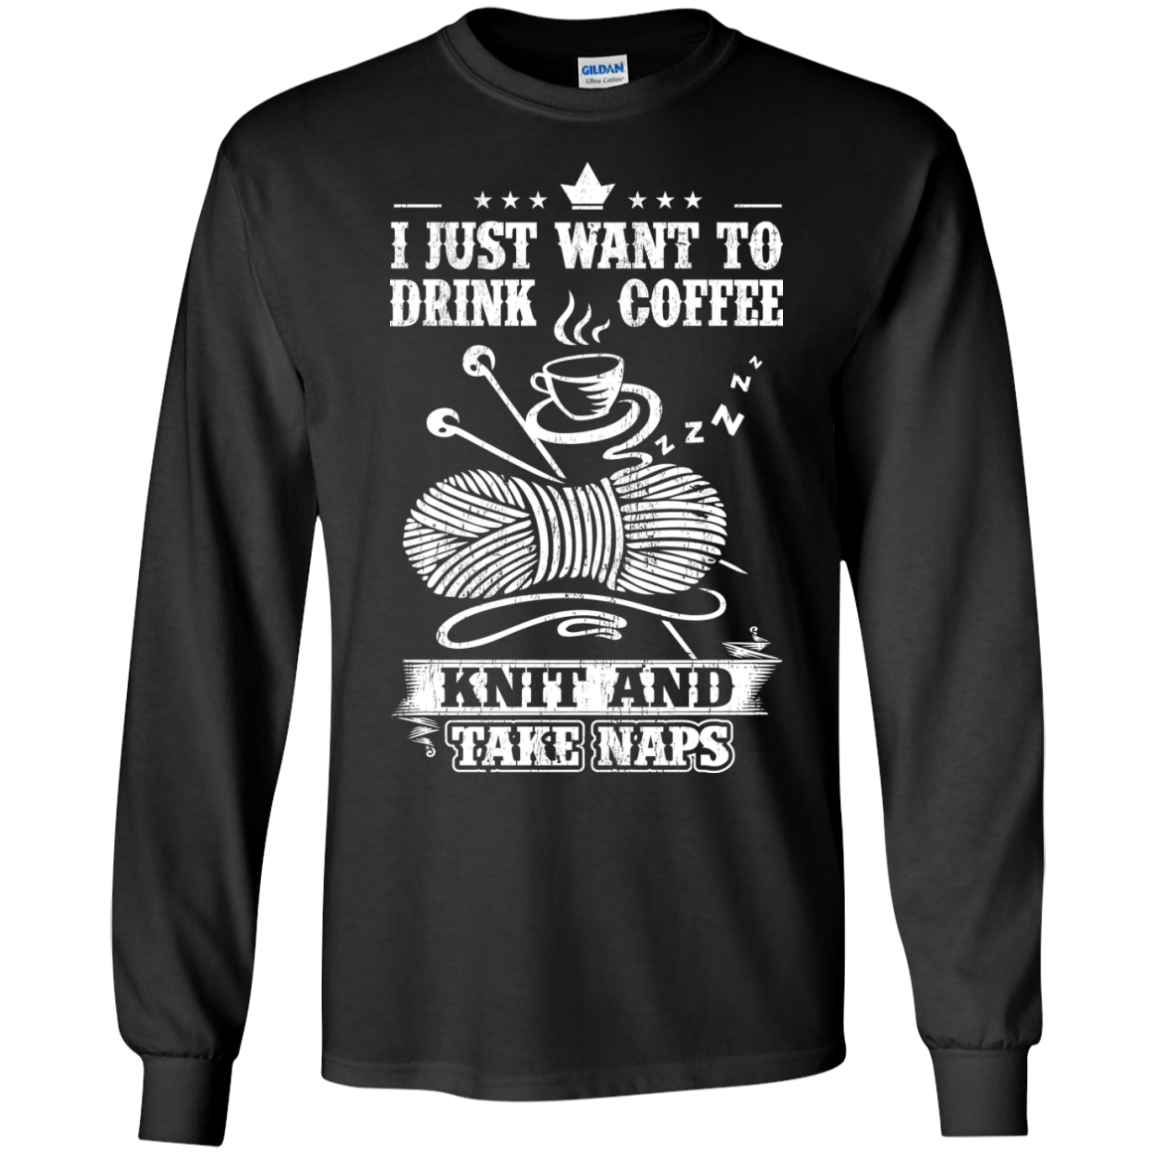 Coffee-Knit-Nap Long Sleeve Ultra Cotton T-Shirt - Crafter4Life - 3